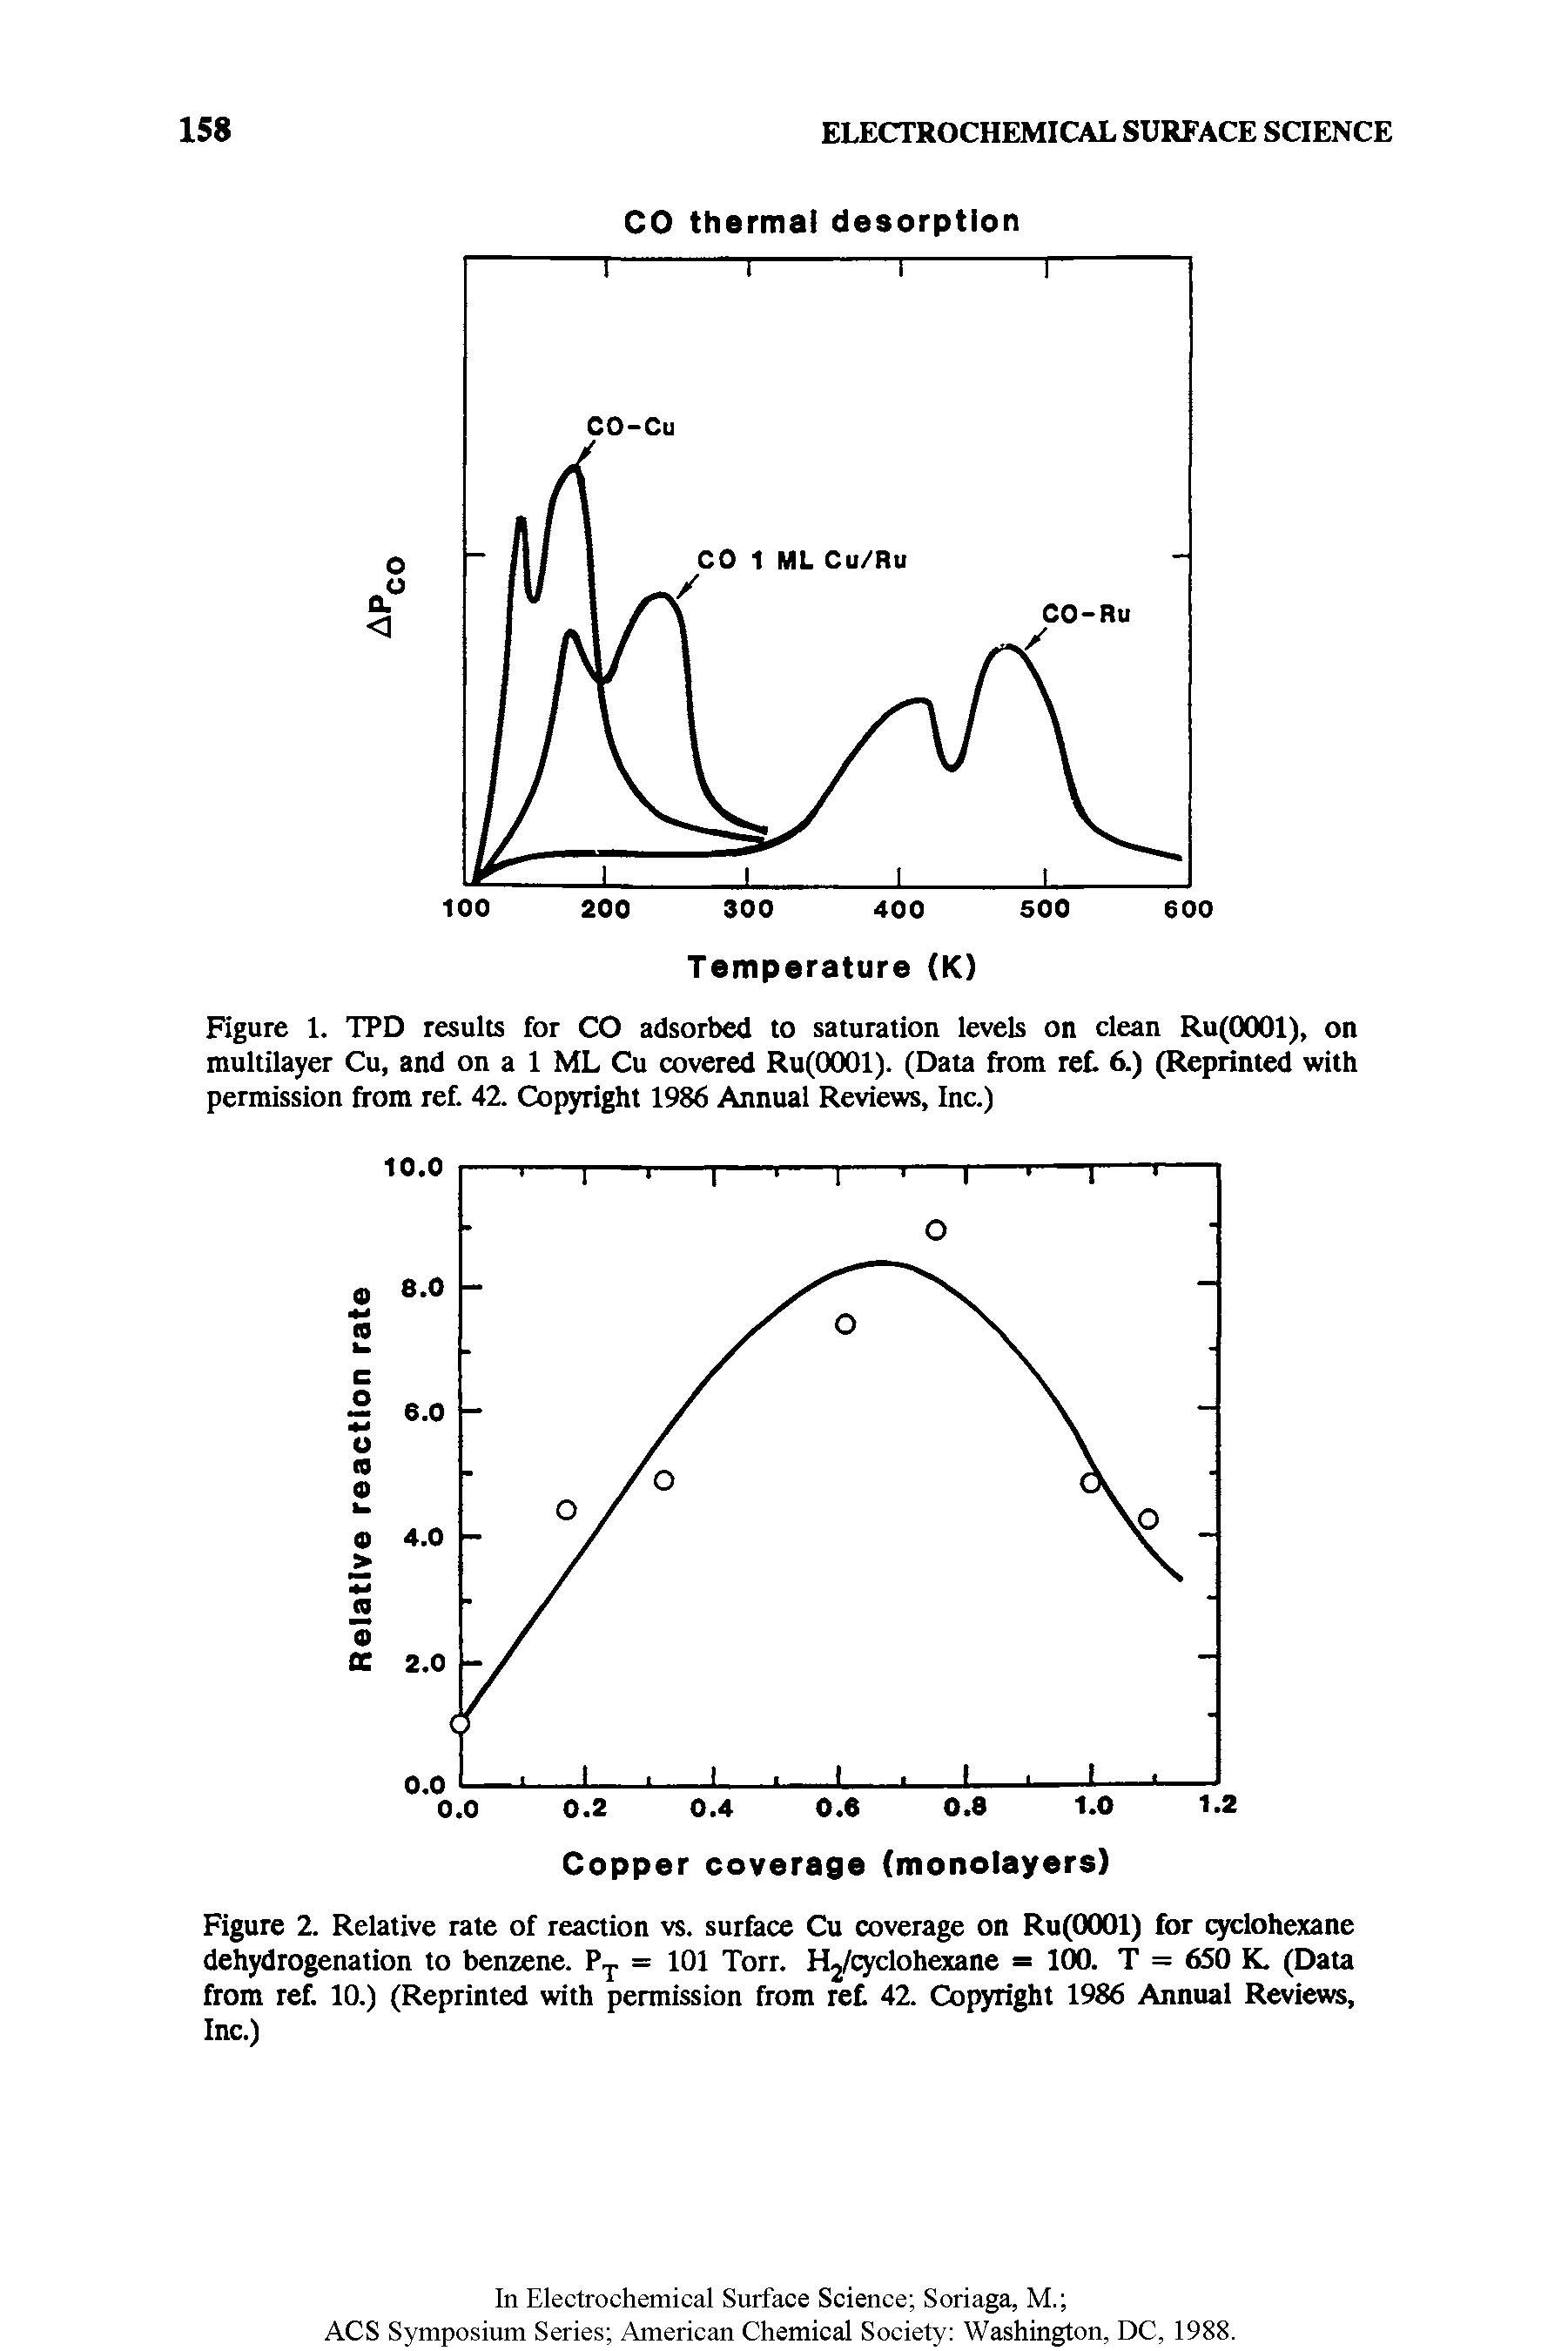 Figure 2. Relative rate of reaction vs. surface Cu coverage on Ru(0001) for cyclohexane dehydrogenation to benzene. PT = 101 Torr. Hj/cyclohexane = 100. T = 650 K. (Data from ref. 10.) (Reprinted with permission from ret 42. Copyright 1986 Annual Reviews, Inc.)...